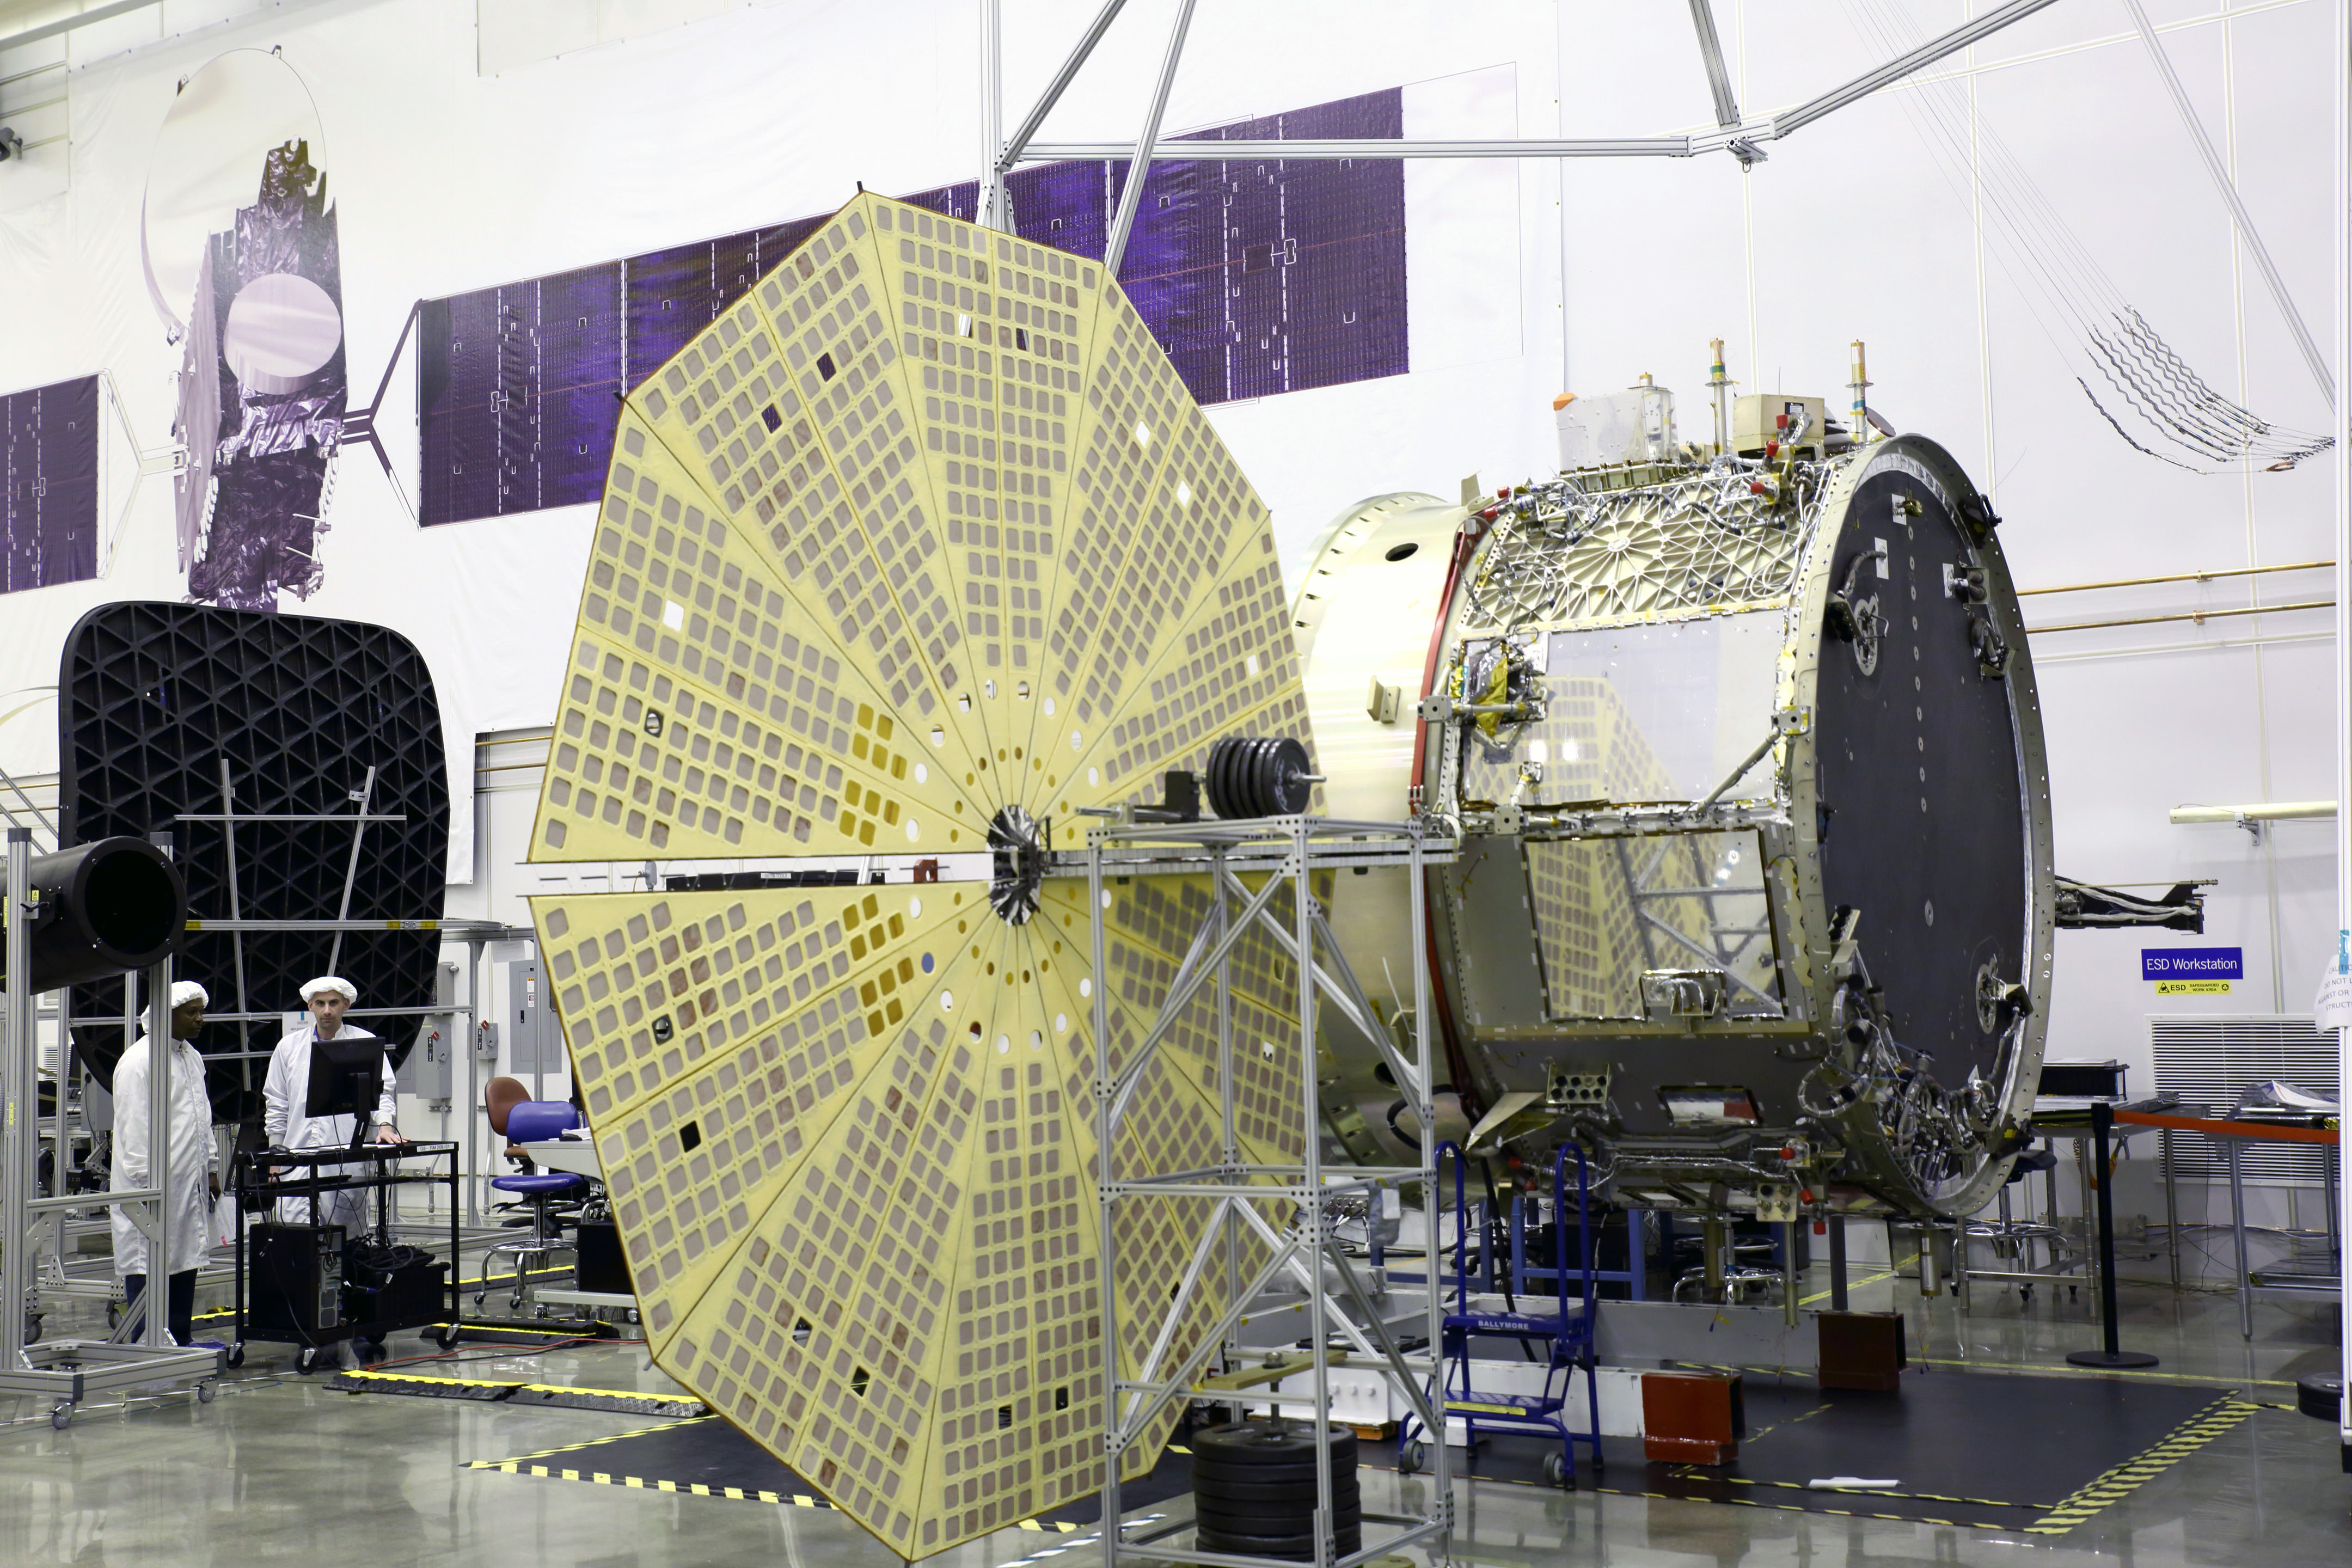 Cygnus service module built by Orbital ATK in their Dulles, Virginia cleanroom is shown here with unfurled Ultraflex solar panels that will fly for the first time with mated pressurized module on the OA-4 ISS resupply mission on ULA Atlas V rocket on Dec. 3, 2015 from Cape Canaveral, Florida.    Credit: Orbital ATK